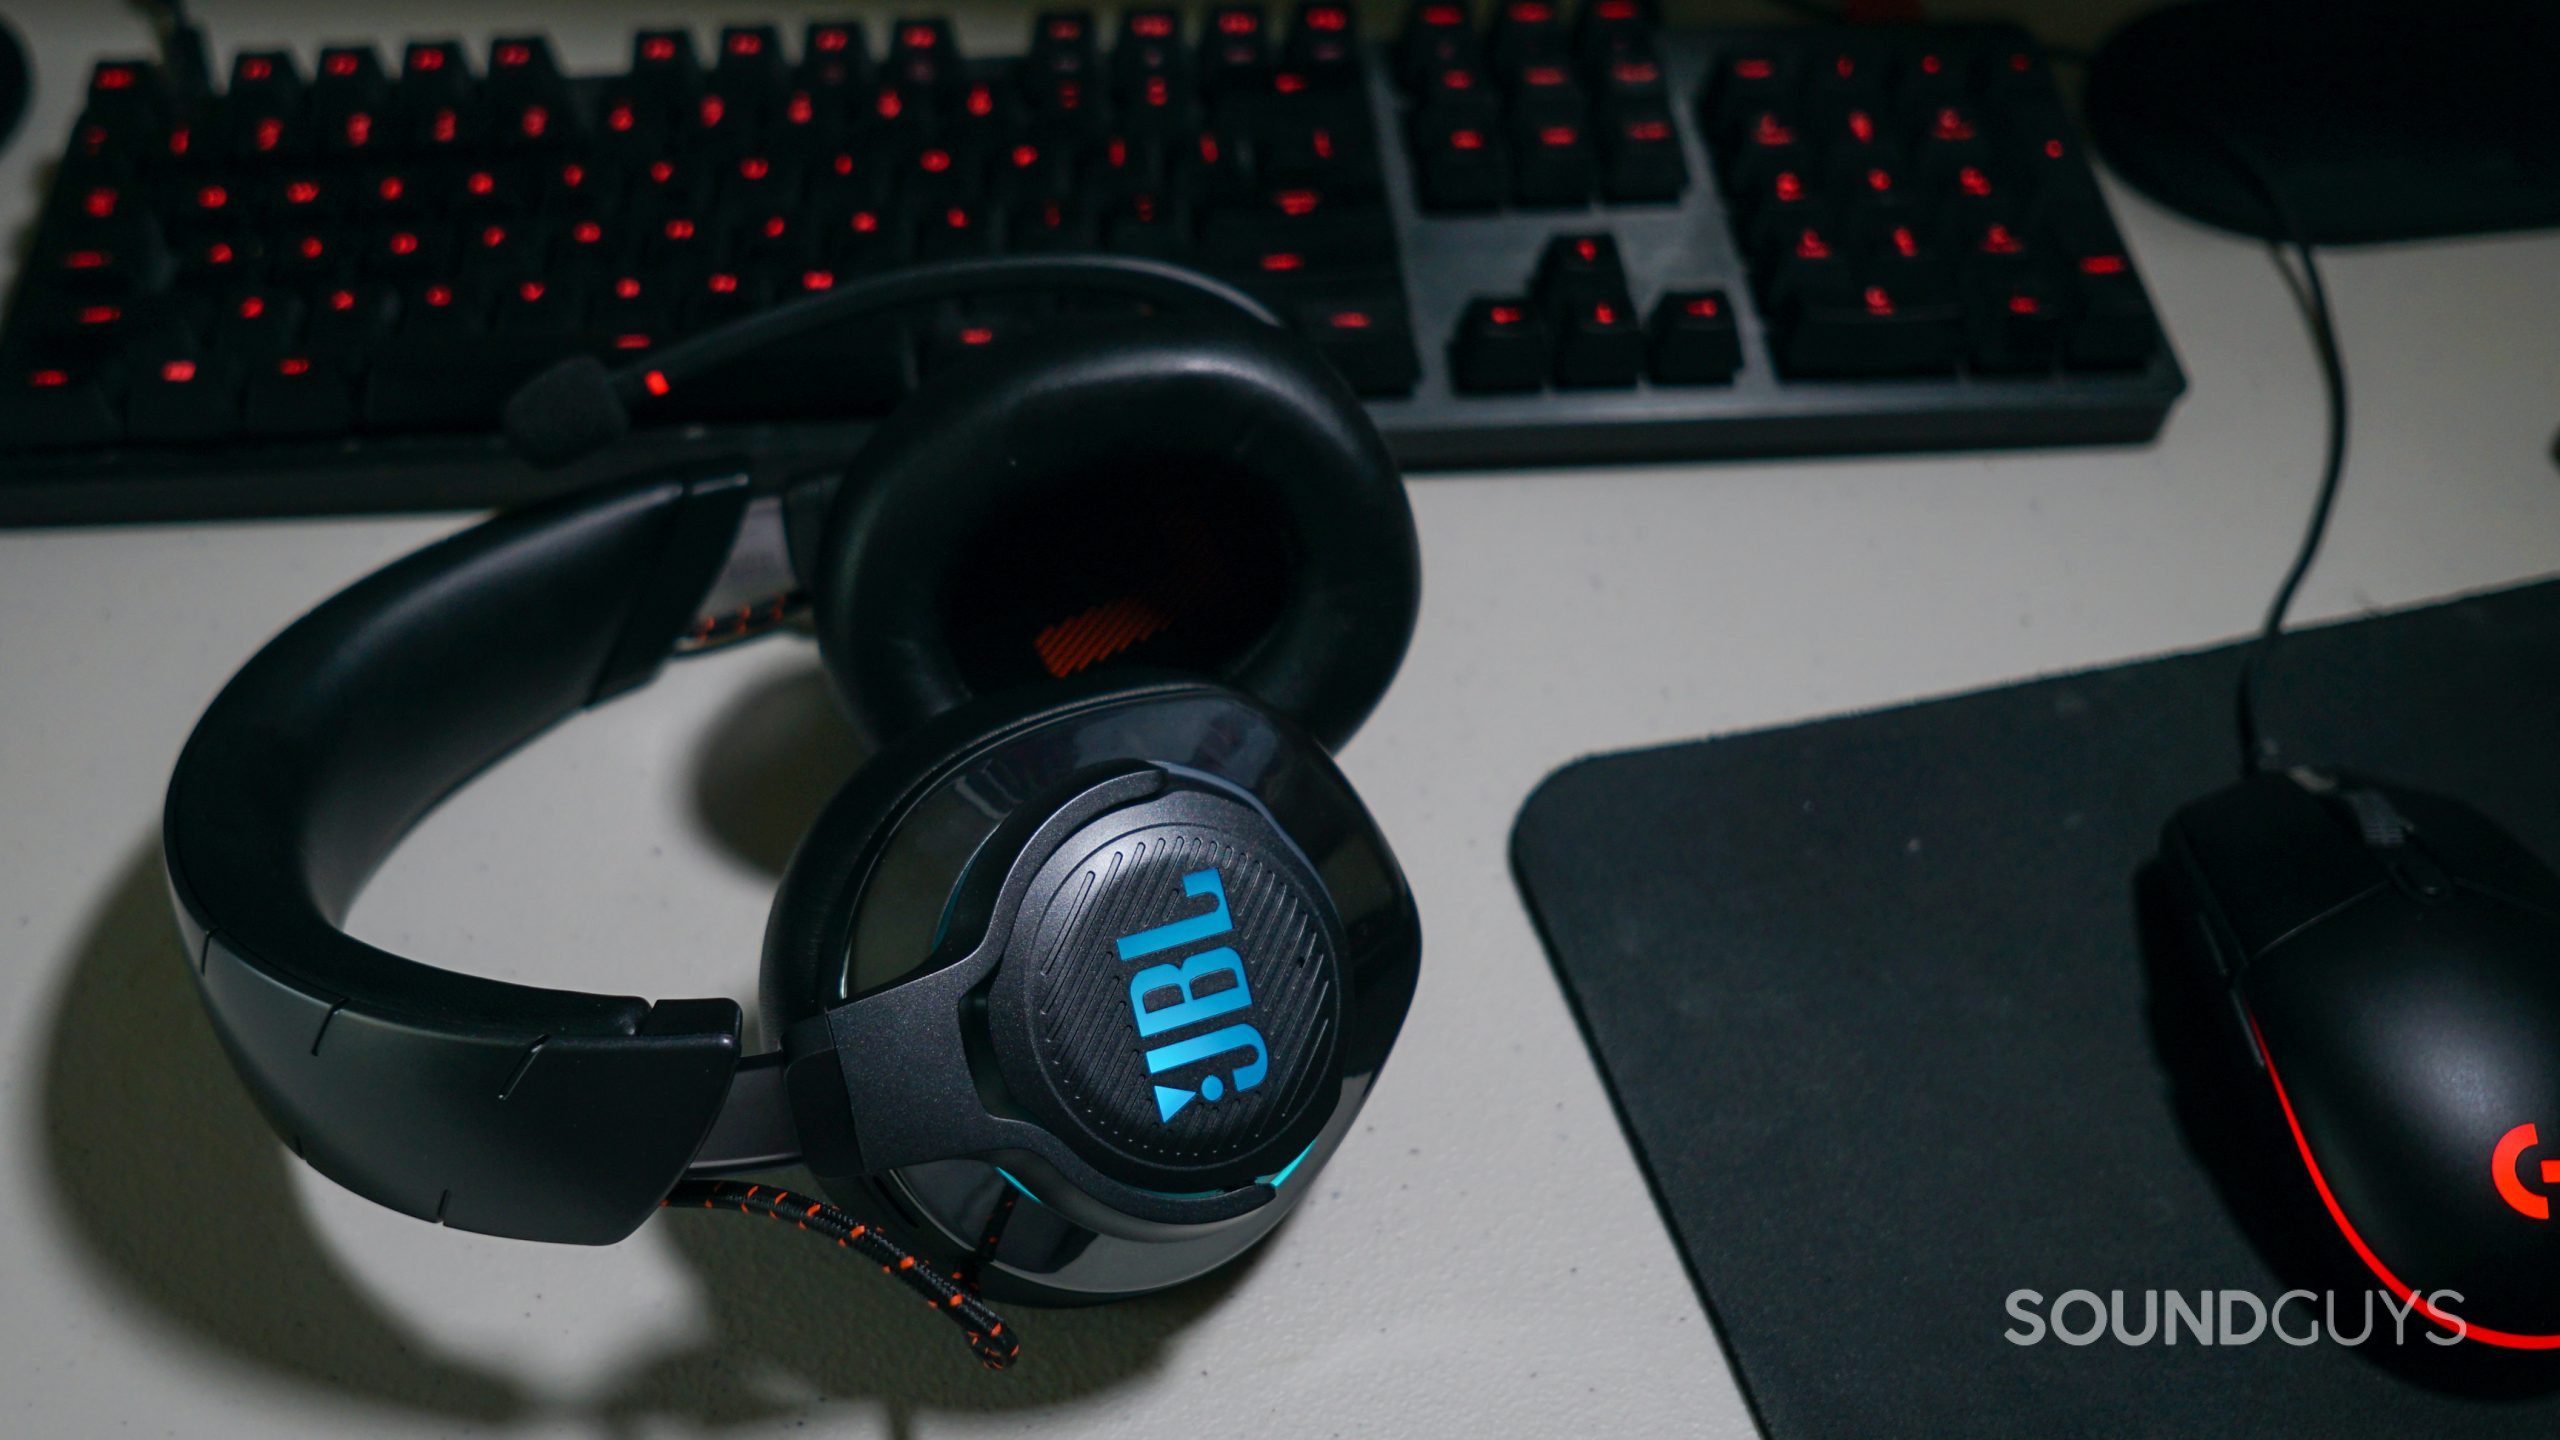 The JBL Quantum 800 lays on a desk next to a Logitech gaming keyboard and mouse.